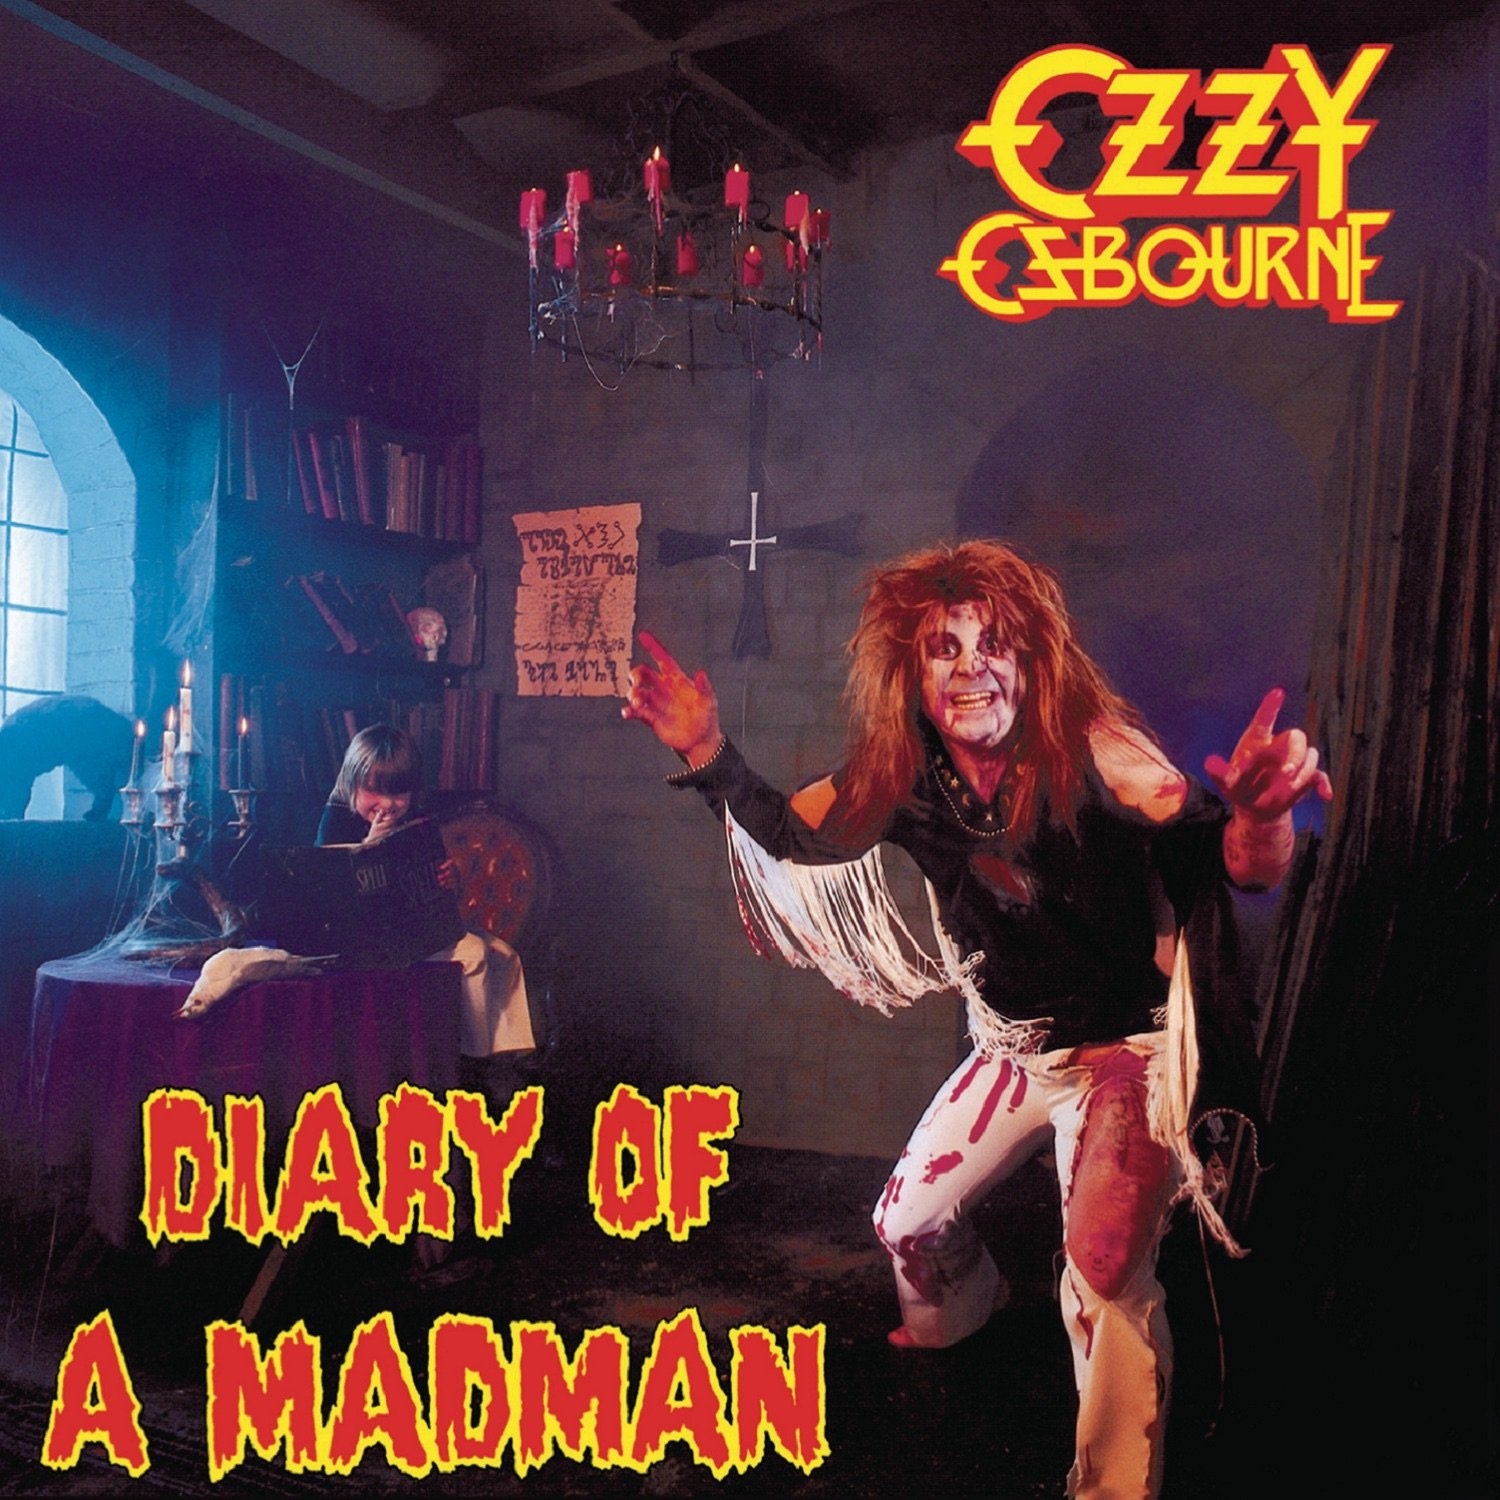 Металл Sony Osbourne, Ozzy - Diary of a Madman (40th anniversary) (Limited Marbled Vinyl) поп sony britney spears baby one more time 20th anniversary limited picture vinyl